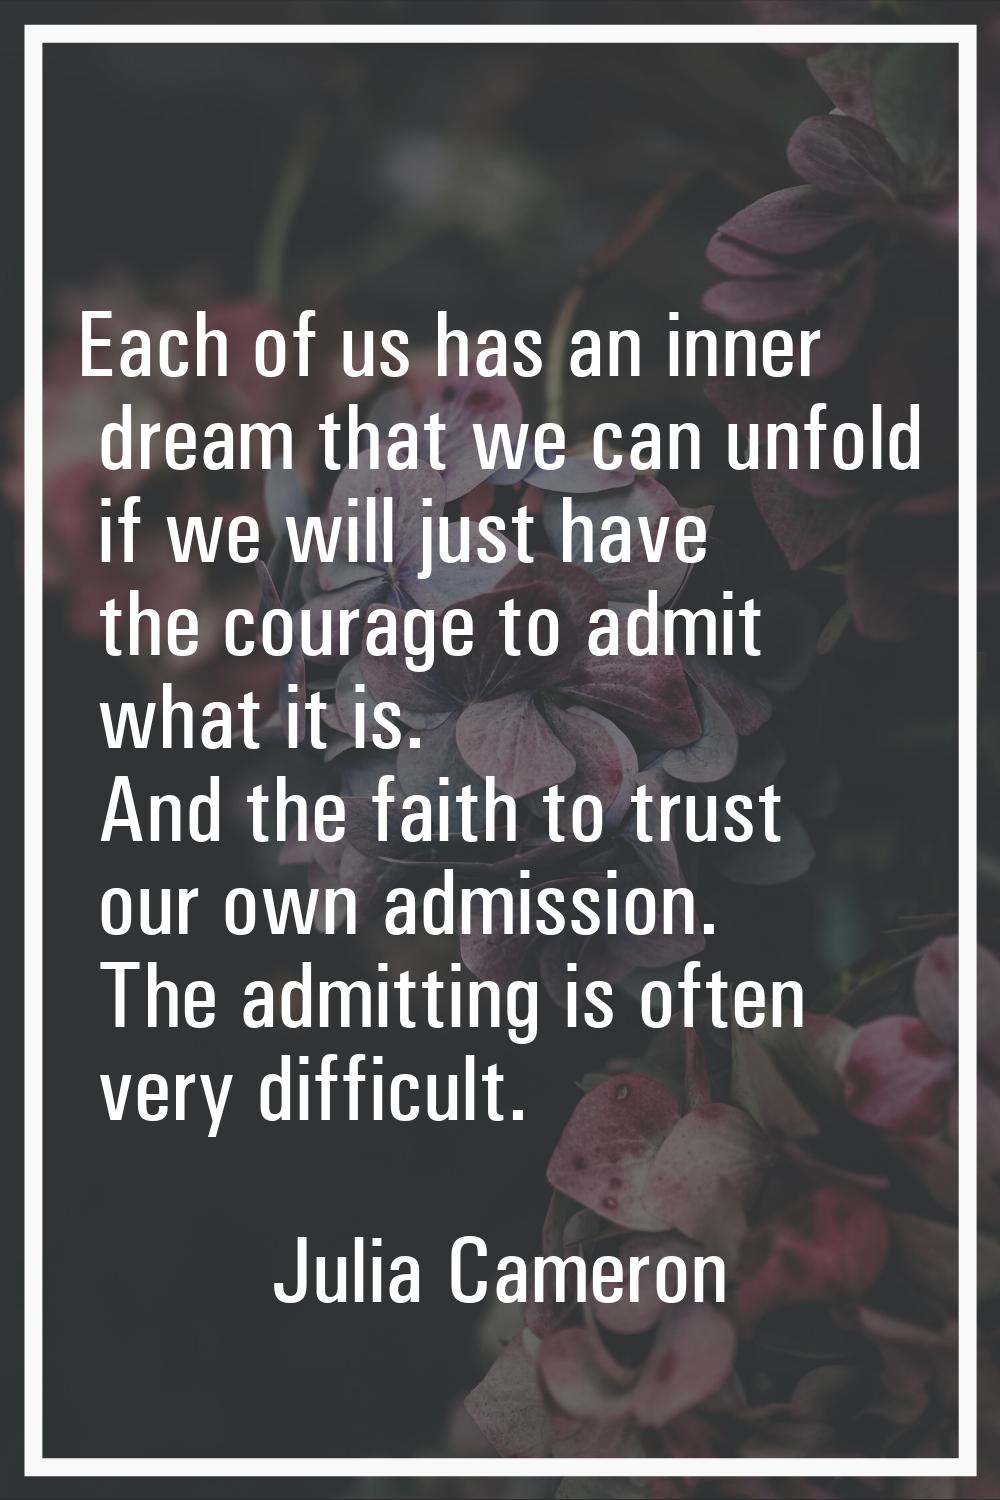 Each of us has an inner dream that we can unfold if we will just have the courage to admit what it 